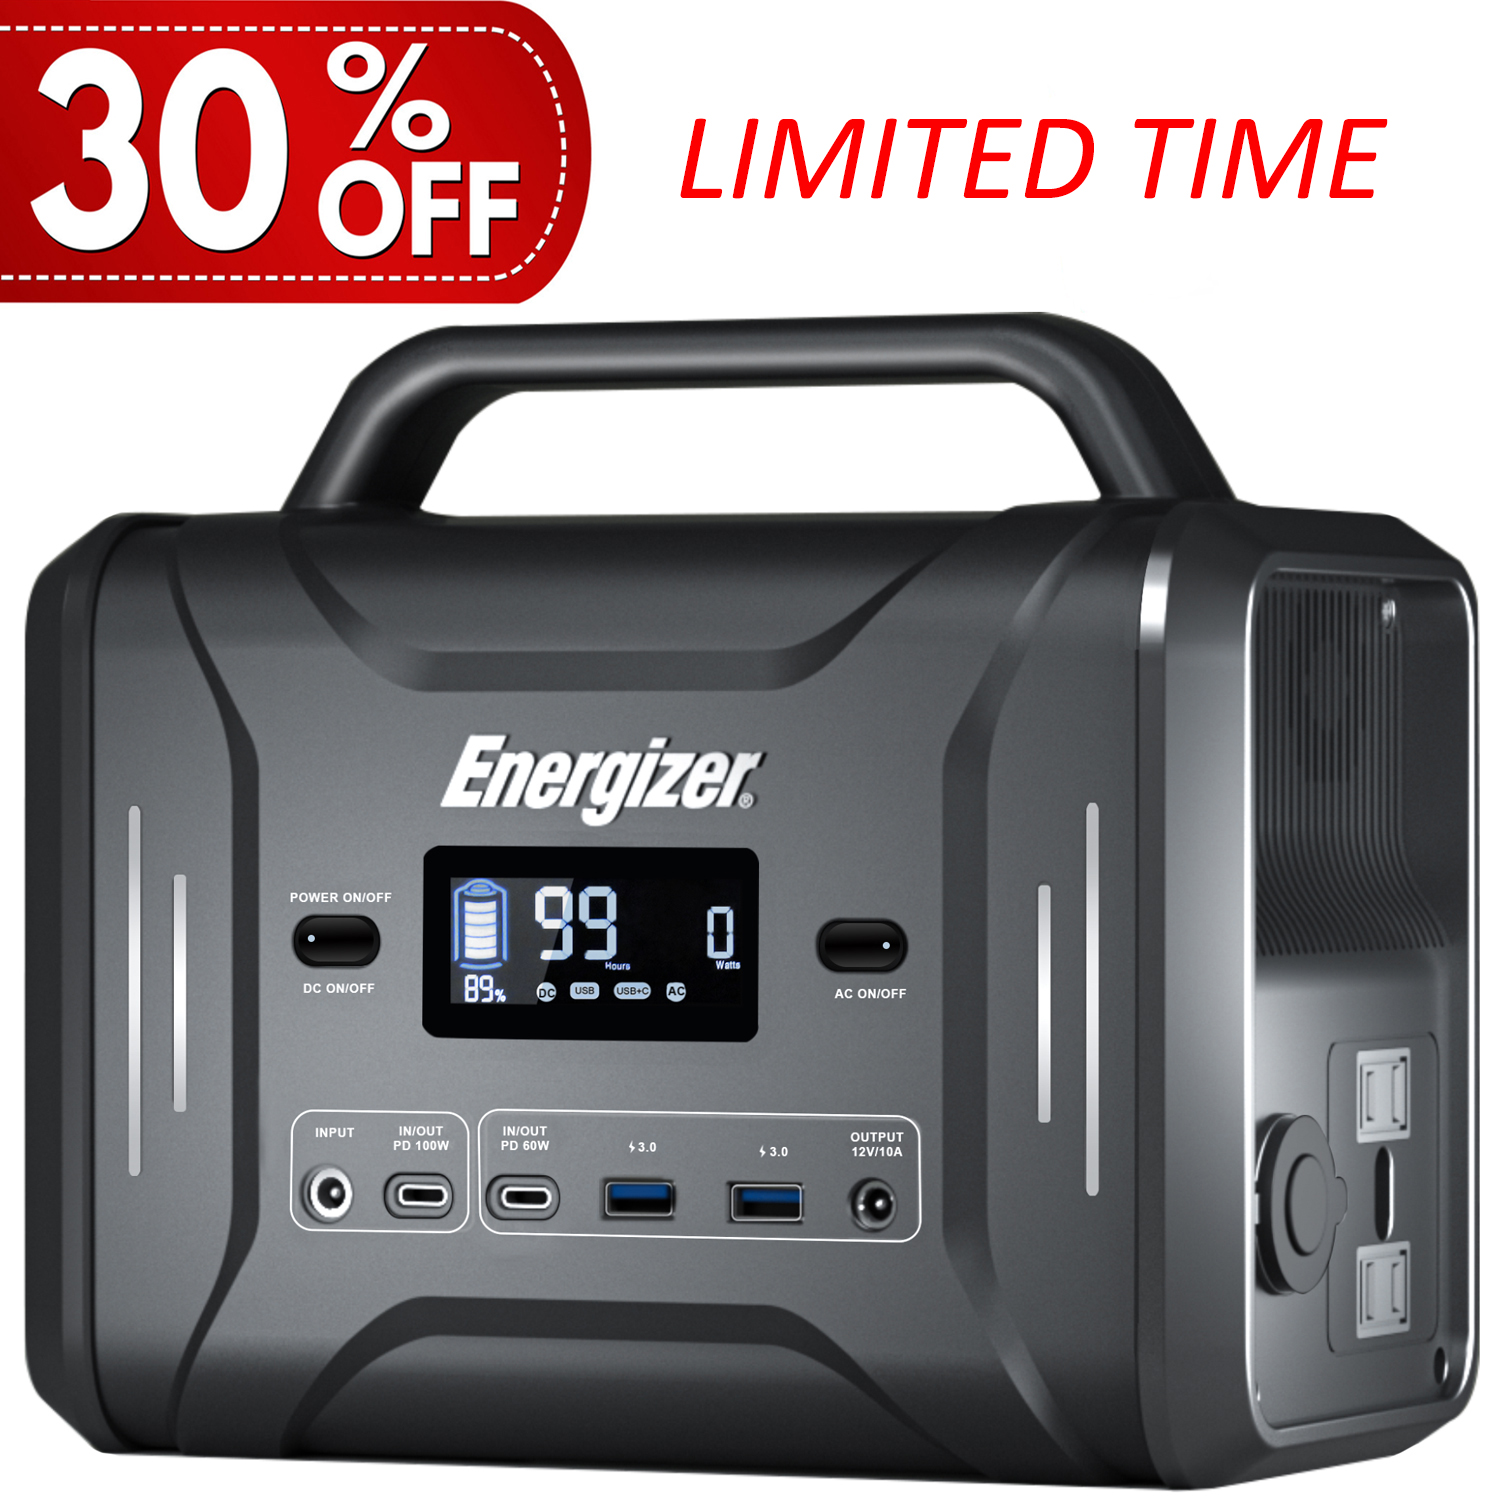 Energizer 320Wh Portable Power Station 100000mAh Emergency Solar Generator 300W Peak 600W Backup Power Supply for Outdoors Camping Travel